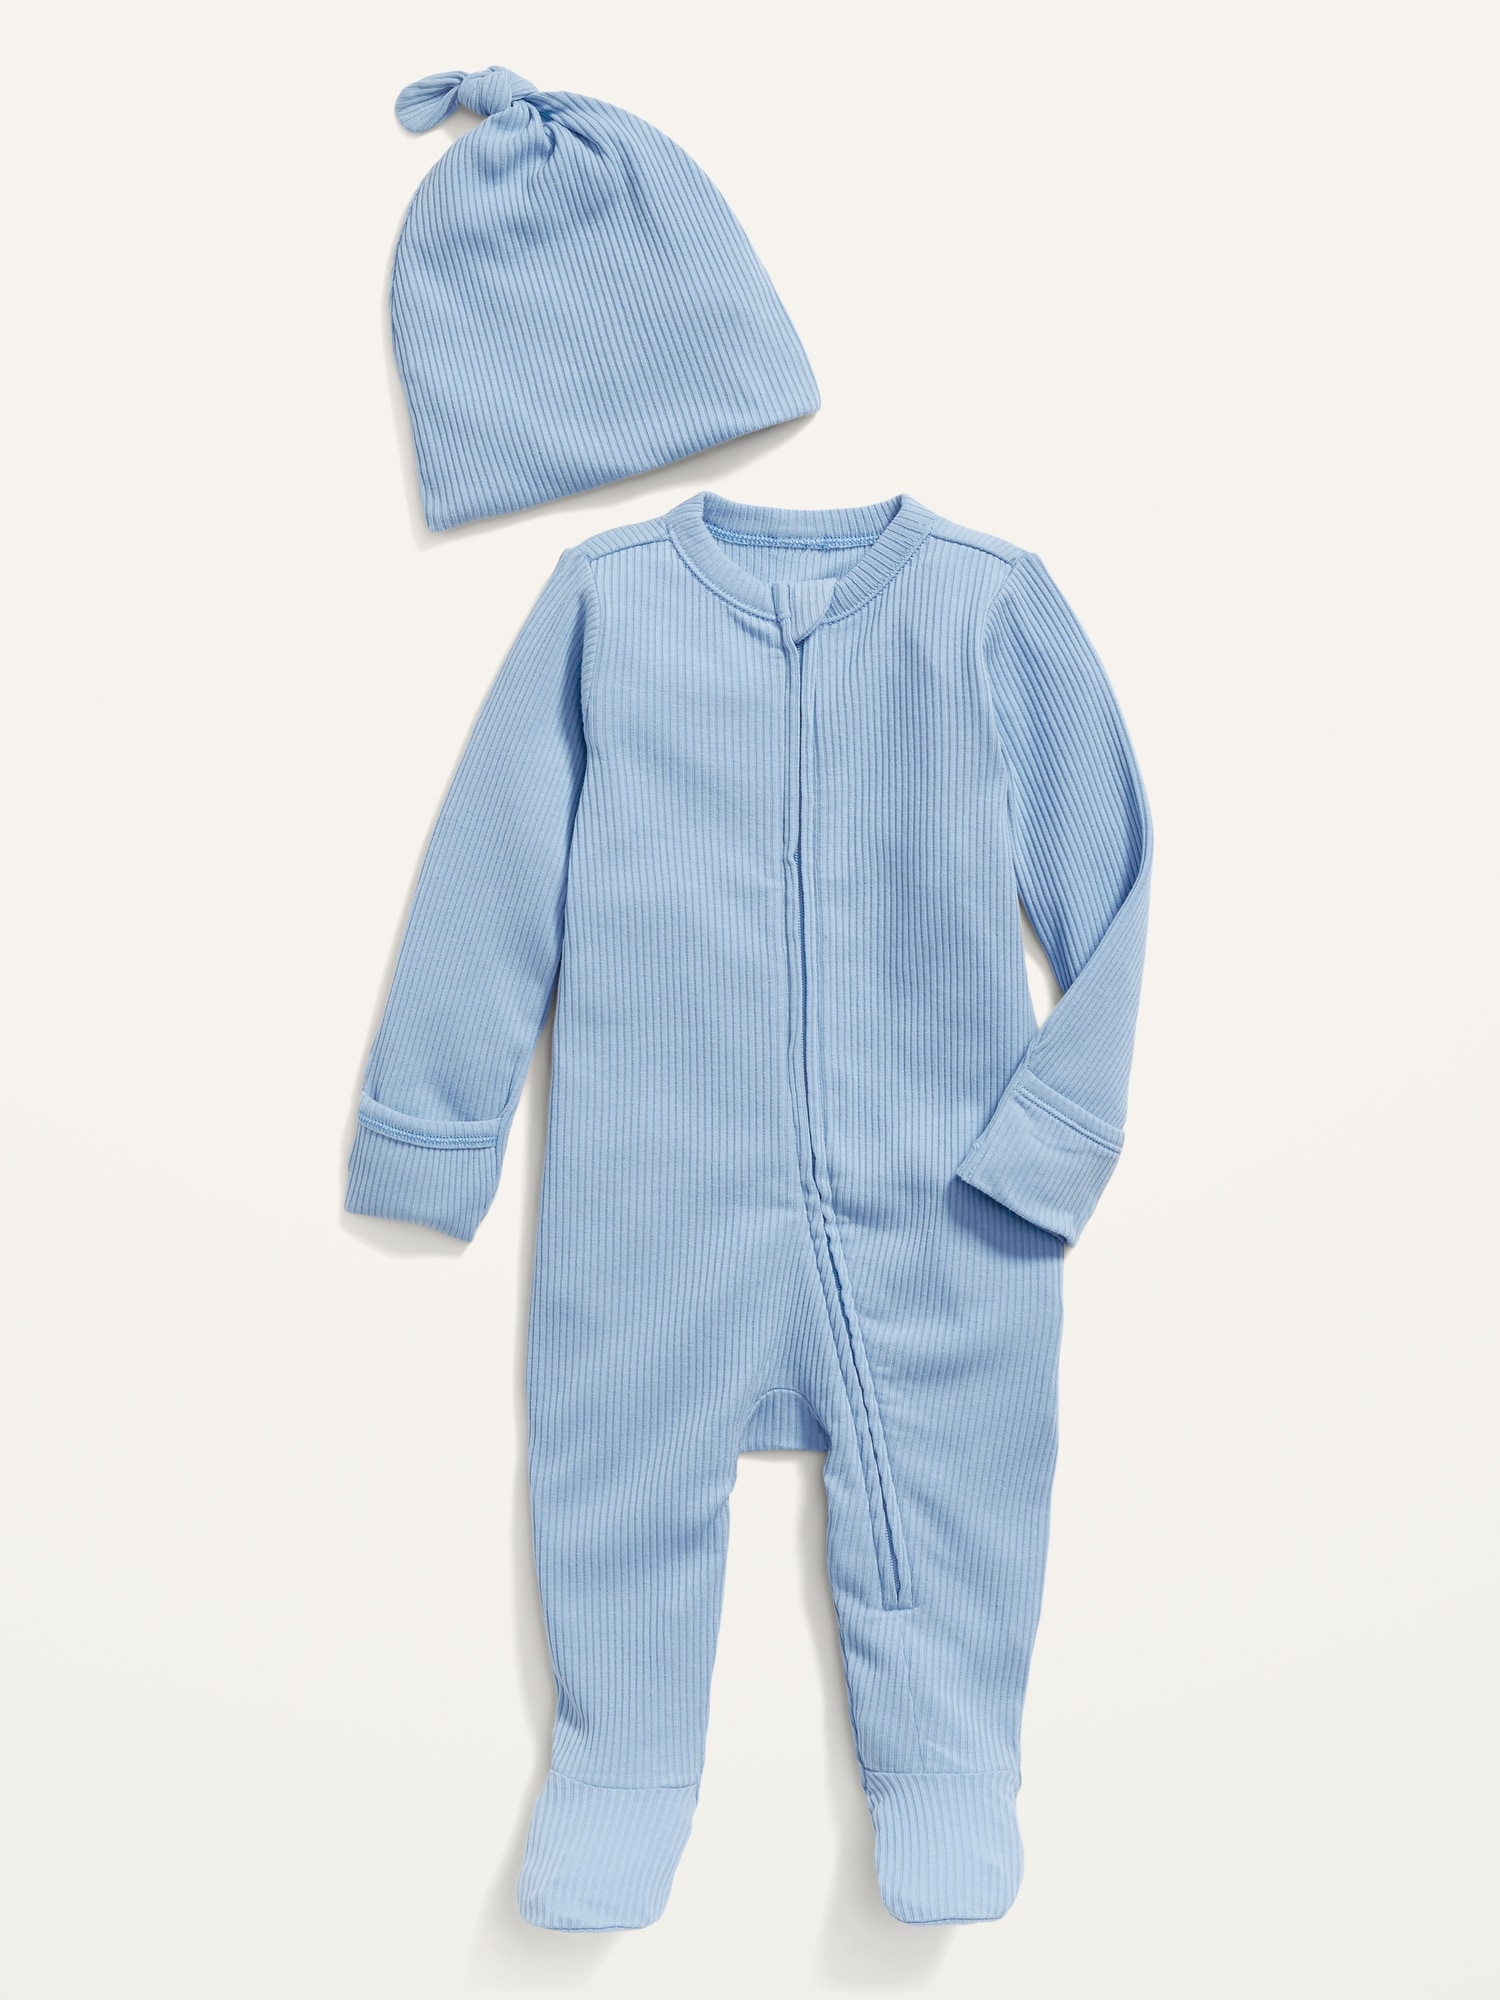 Footed Sleep & Play Rib-Knit One-Piece & Beanie Layette Set for Baby Hot Deal